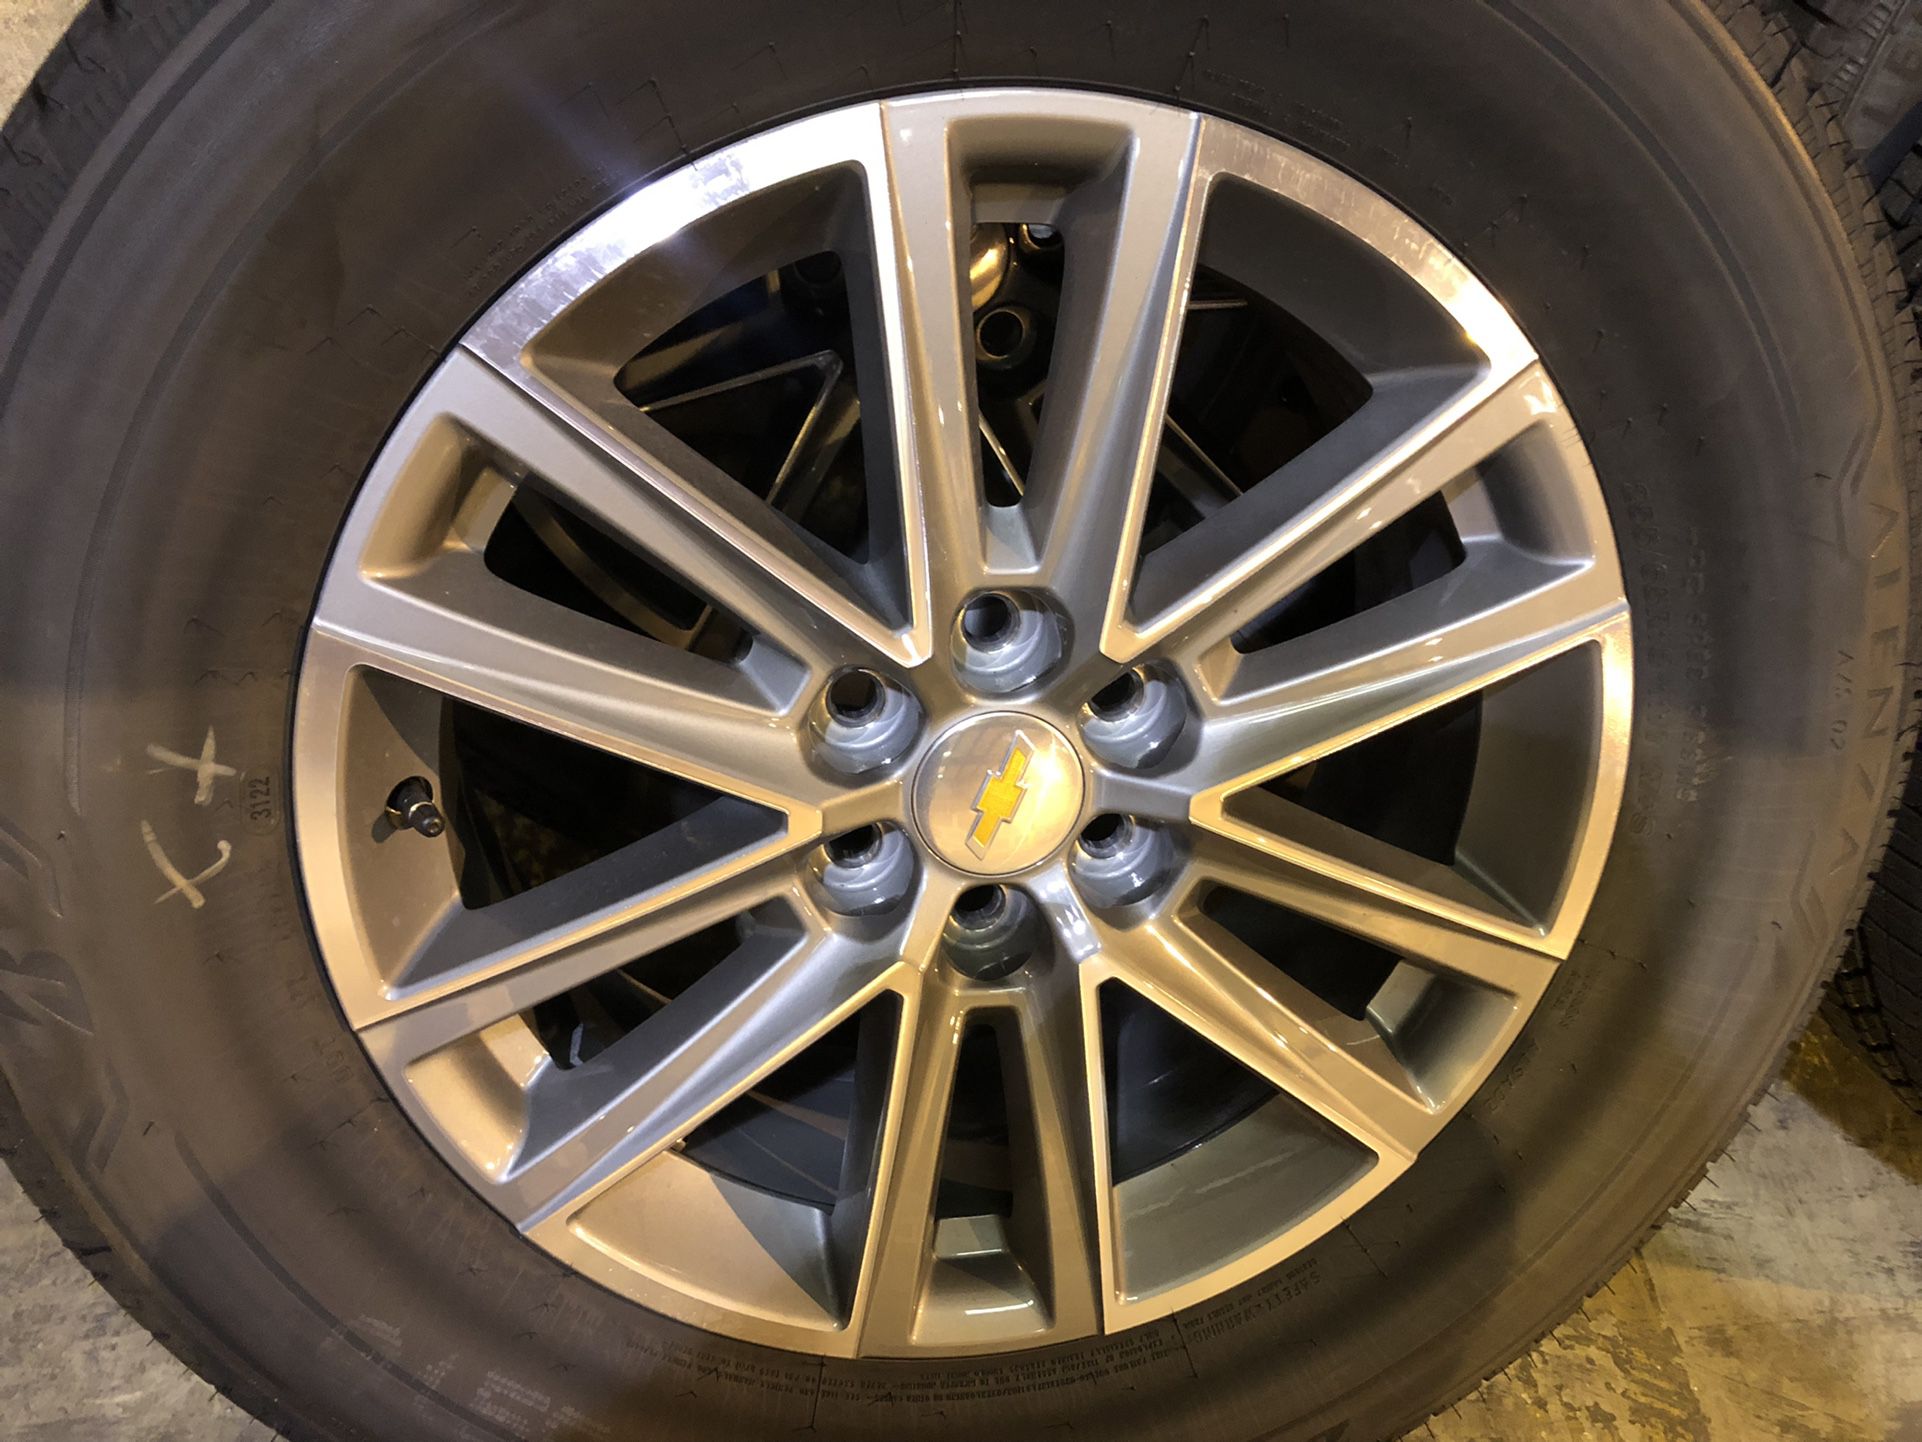 New Chevrolet Wheels And Tires - Chevy Traverse Wheels